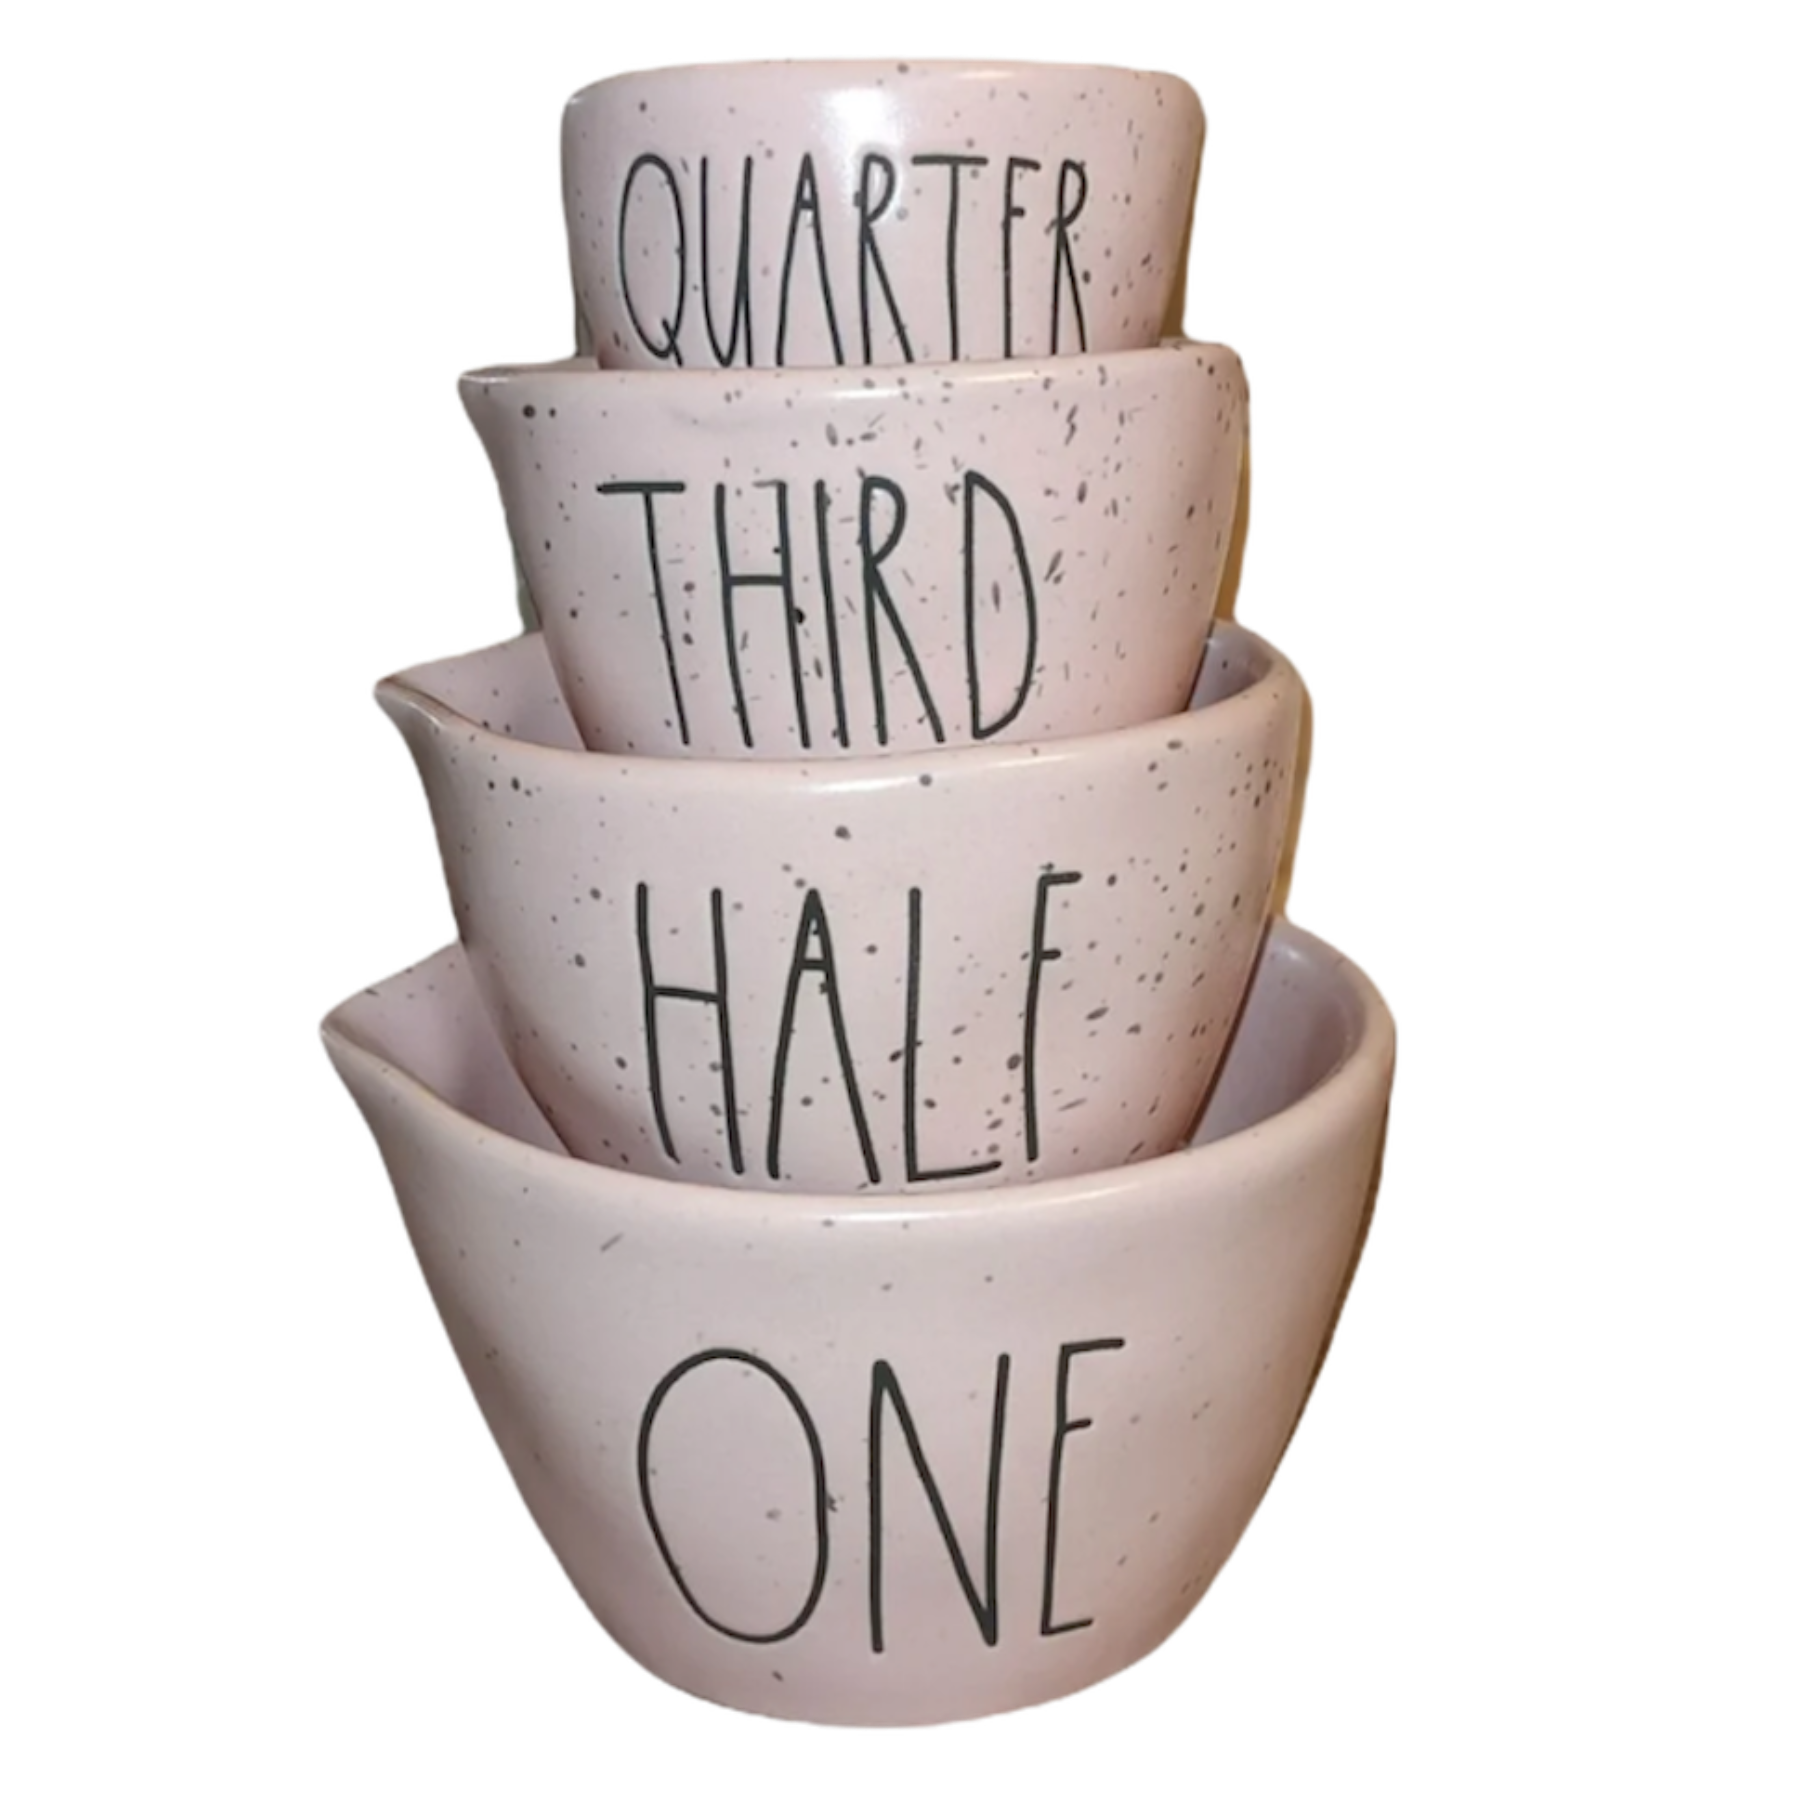 Rae Dunn Measuring Cups and the Collectors Buying Them - Resell Calendar